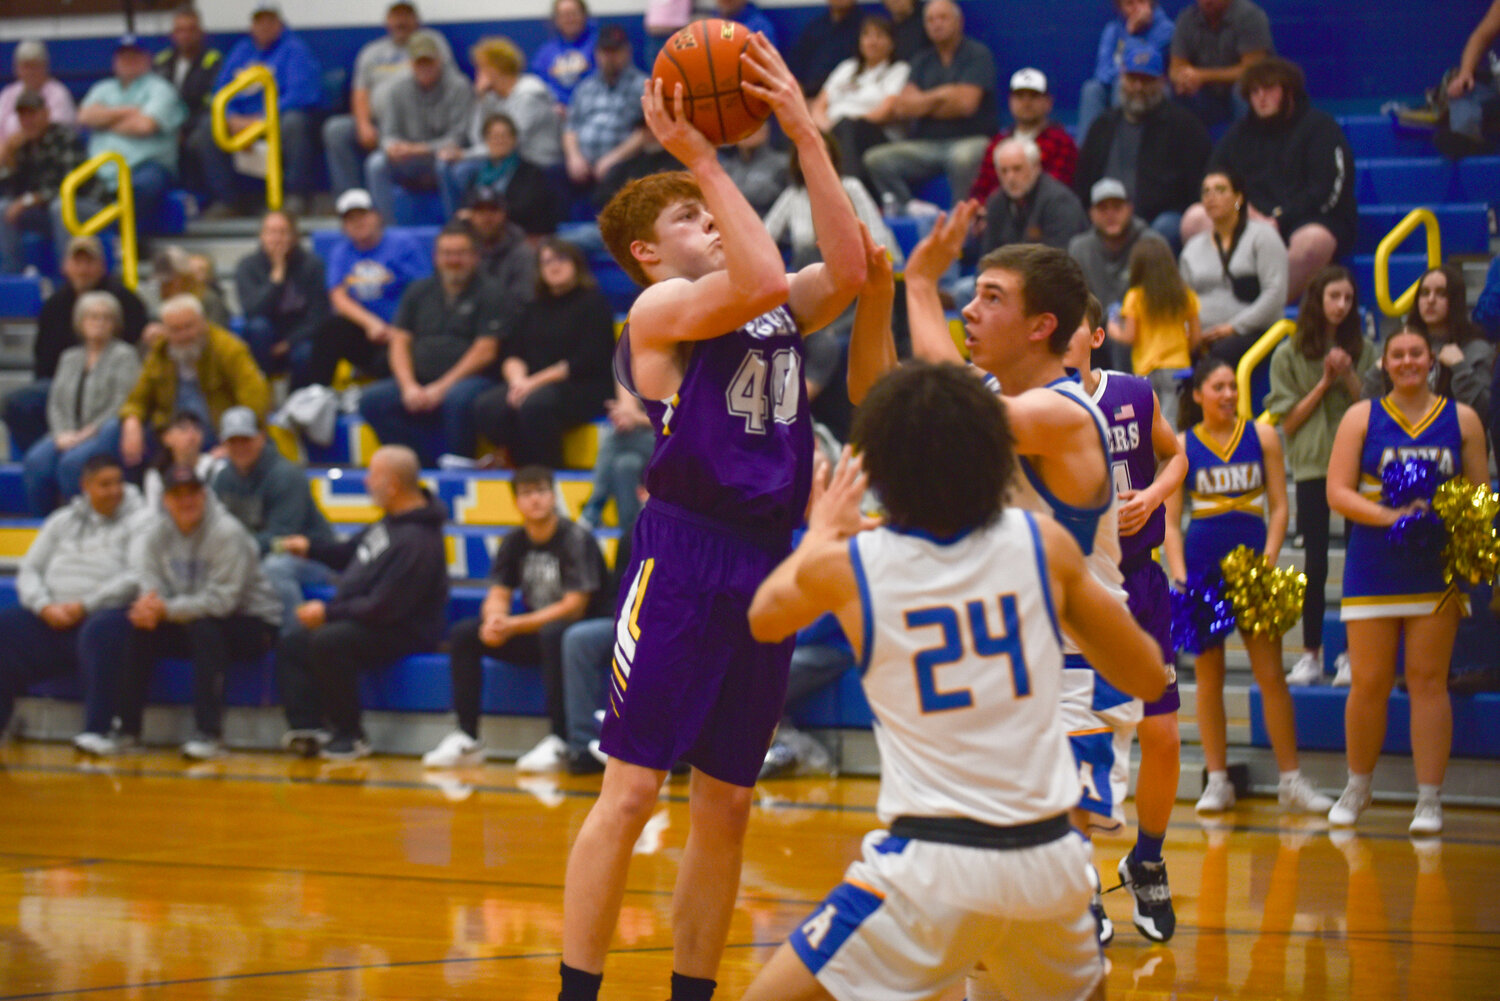 Ethan Thayer takes the ball to the rim during Adna's 78-37 win over Onalaska Dec. 7.